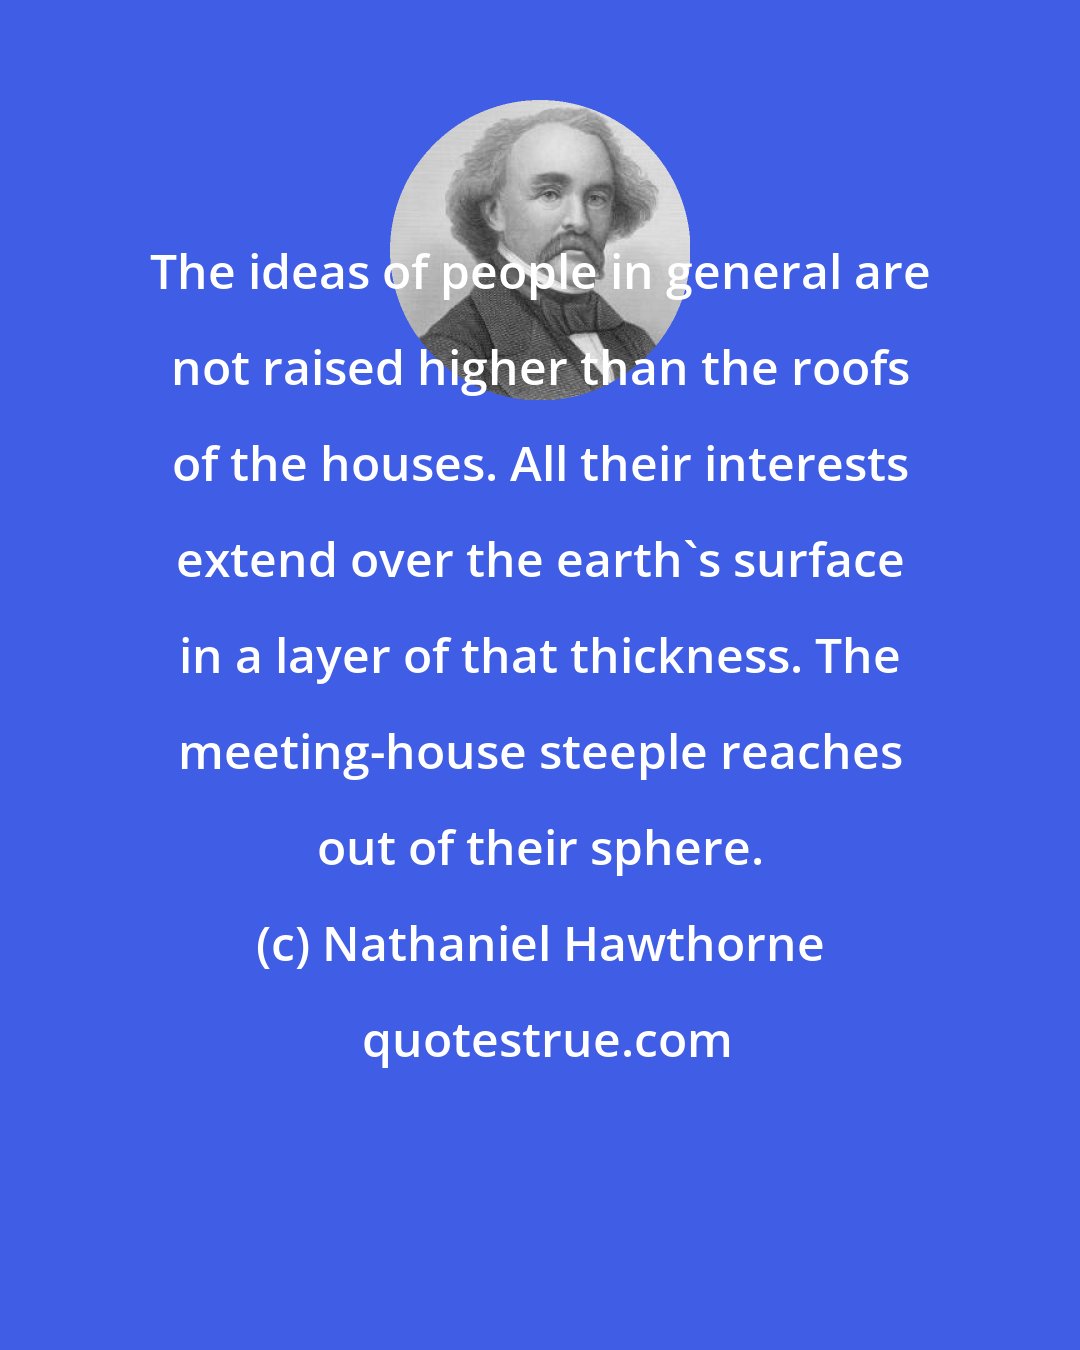 Nathaniel Hawthorne: The ideas of people in general are not raised higher than the roofs of the houses. All their interests extend over the earth's surface in a layer of that thickness. The meeting-house steeple reaches out of their sphere.